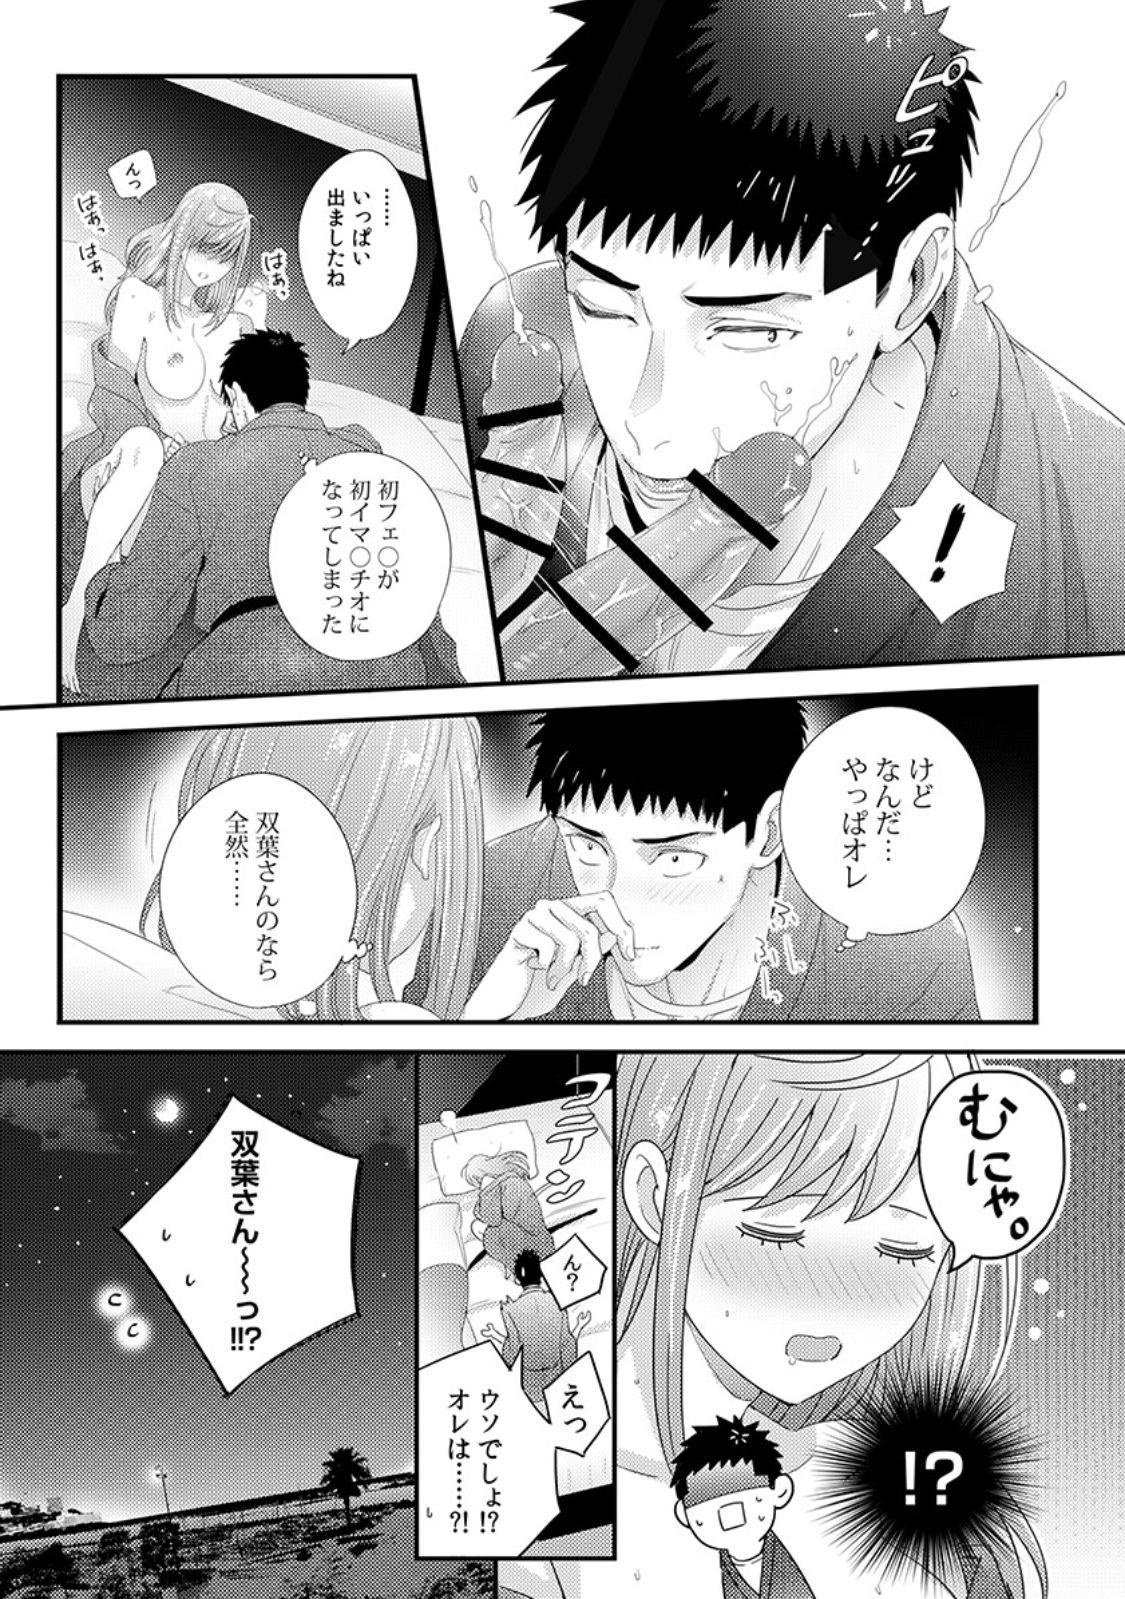 Please Let Me Hold You Futaba-San! Ch. 1-4 23